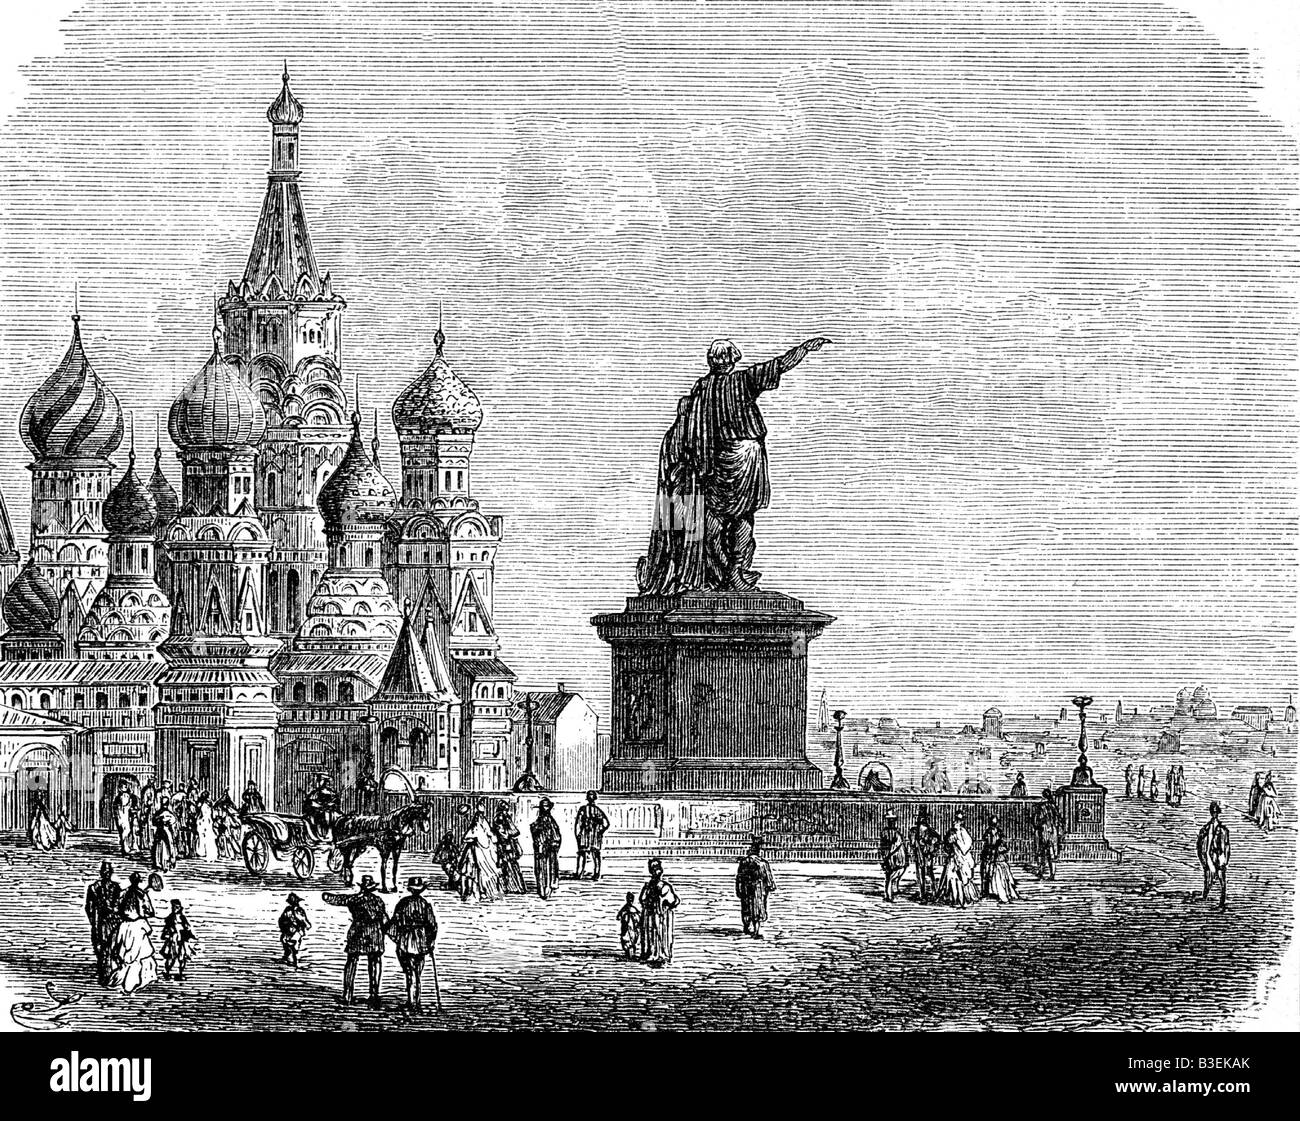 geography / travel, Russia, Moscow, churches, Wassili cathedral, orginial engraving, 19th century, historic, historical, Europe, architecture, building, church, monument, statue, imperial roof, onion dome, people, Stock Photo